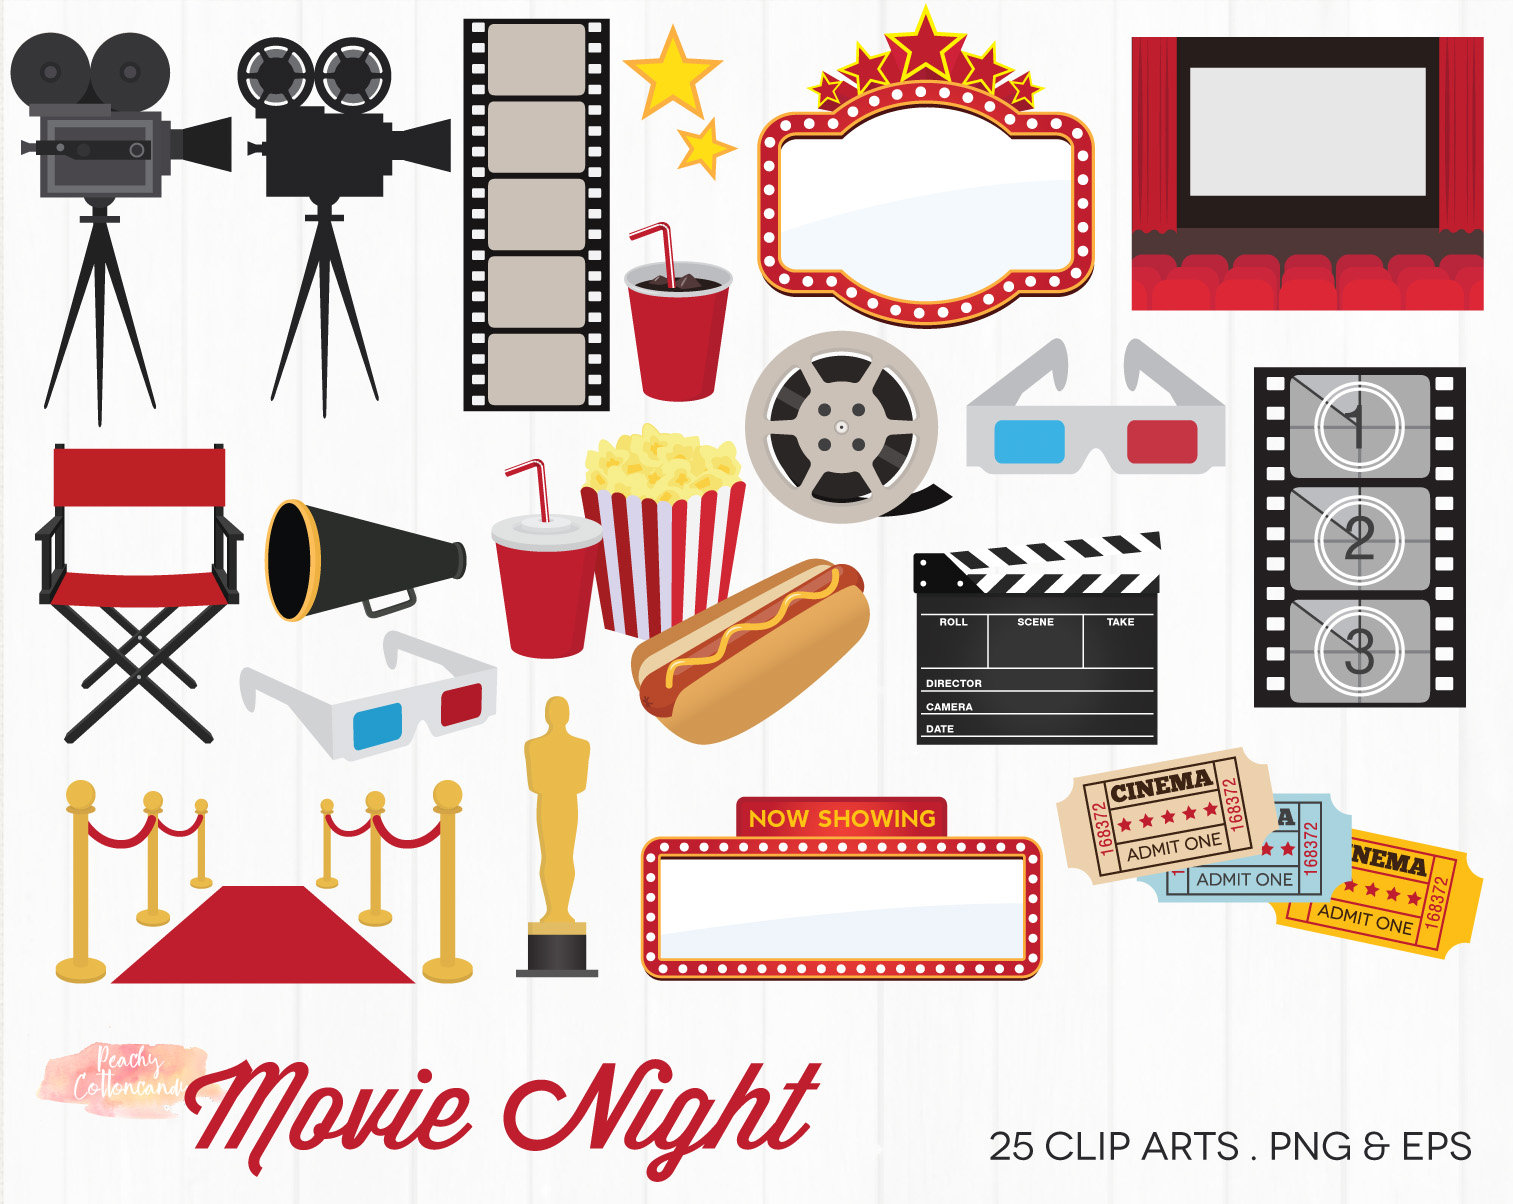 movie theater sign clipart box